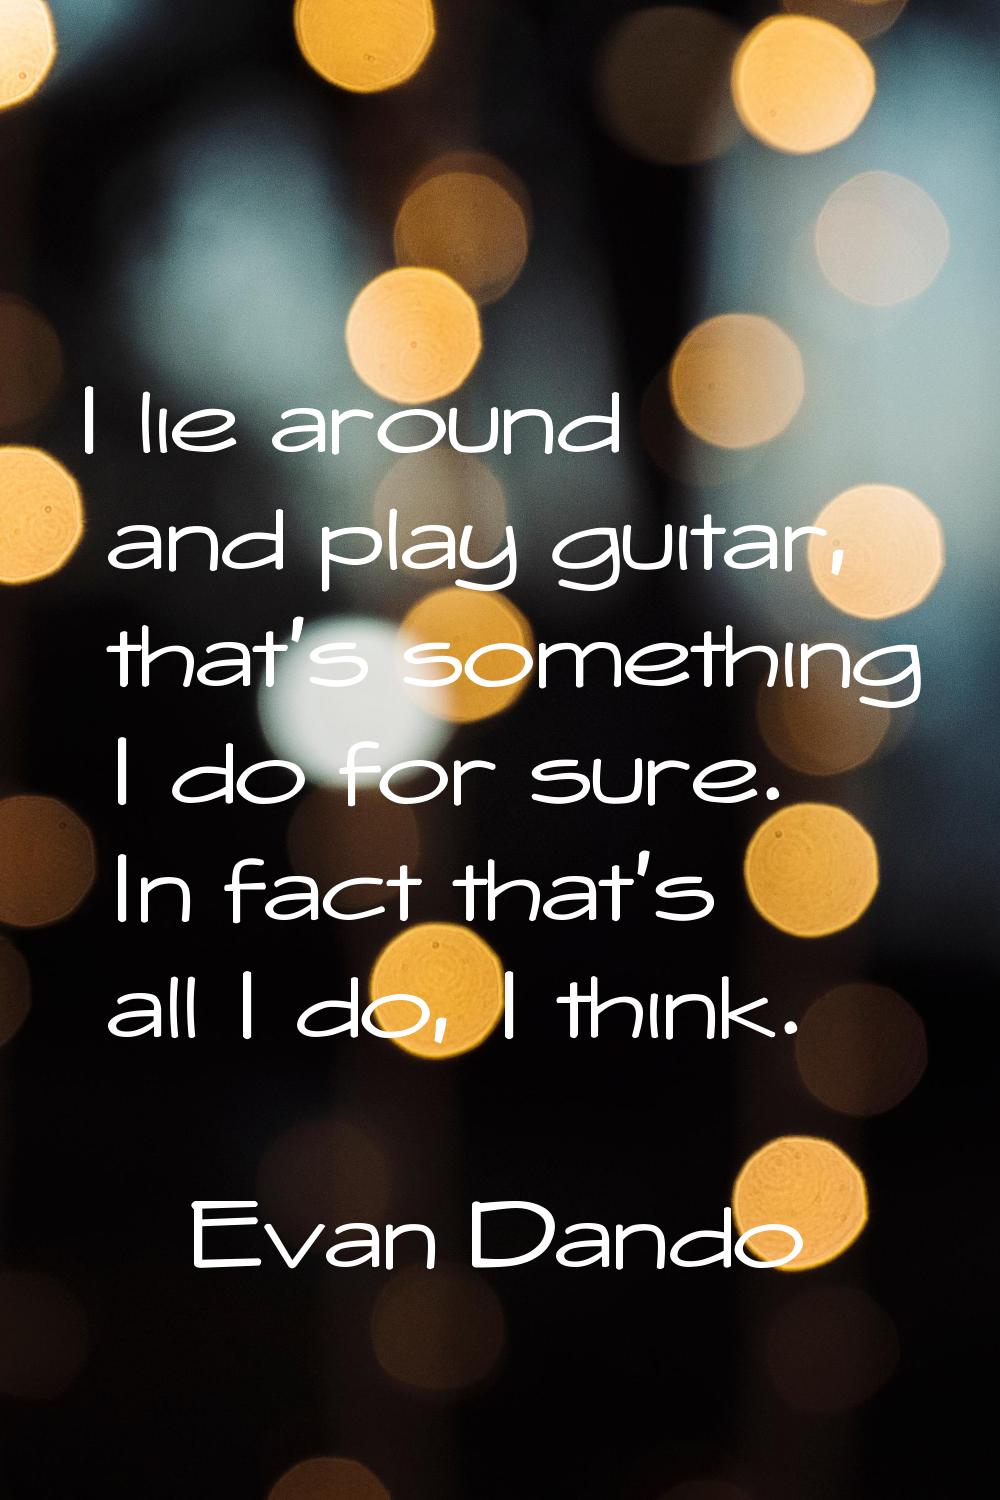 I lie around and play guitar, that's something I do for sure. In fact that's all I do, I think.